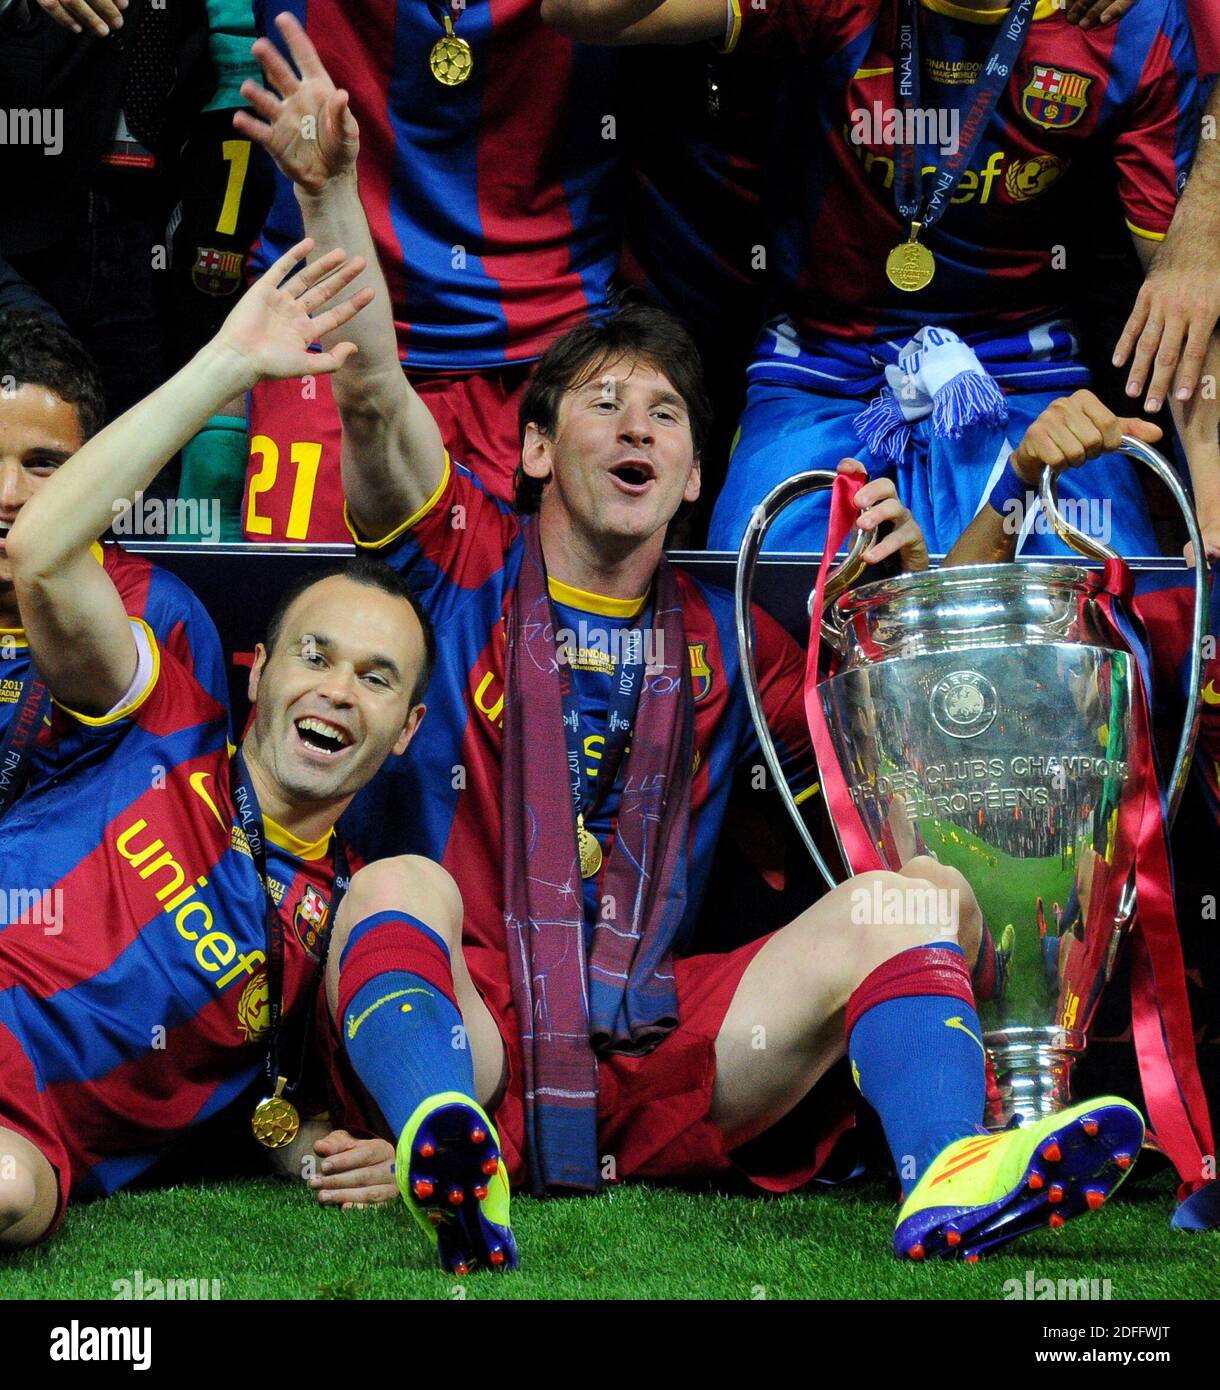 File photo - FC Barcelona's Lionel Messi during the Champion's League Final  soccer match, Barcelona vs Manchester United, in London, England on May  28th, 2011. Barcelona won 3-1. Argentine football star Lionel